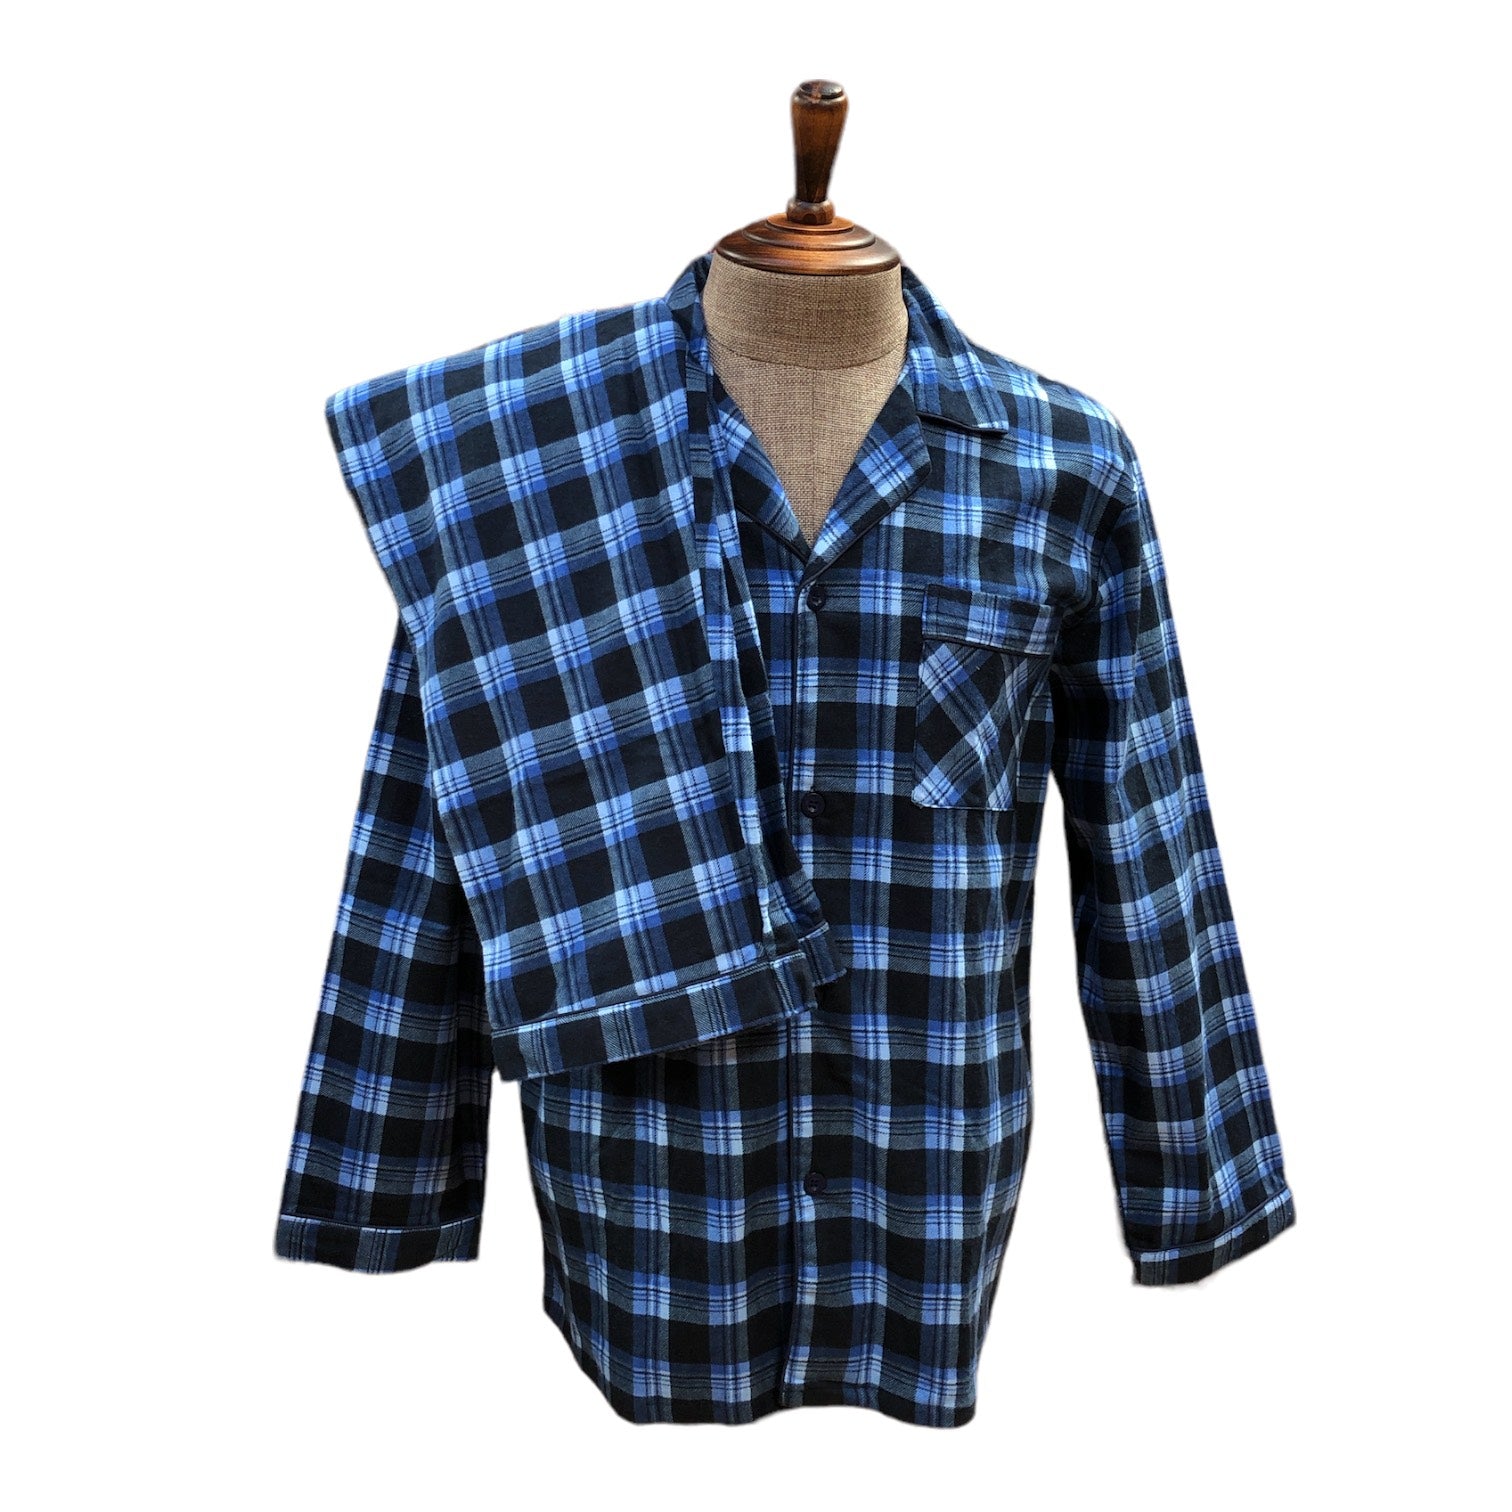 Men's Two Piece Flannel Pajama Set with Matching Bottoms